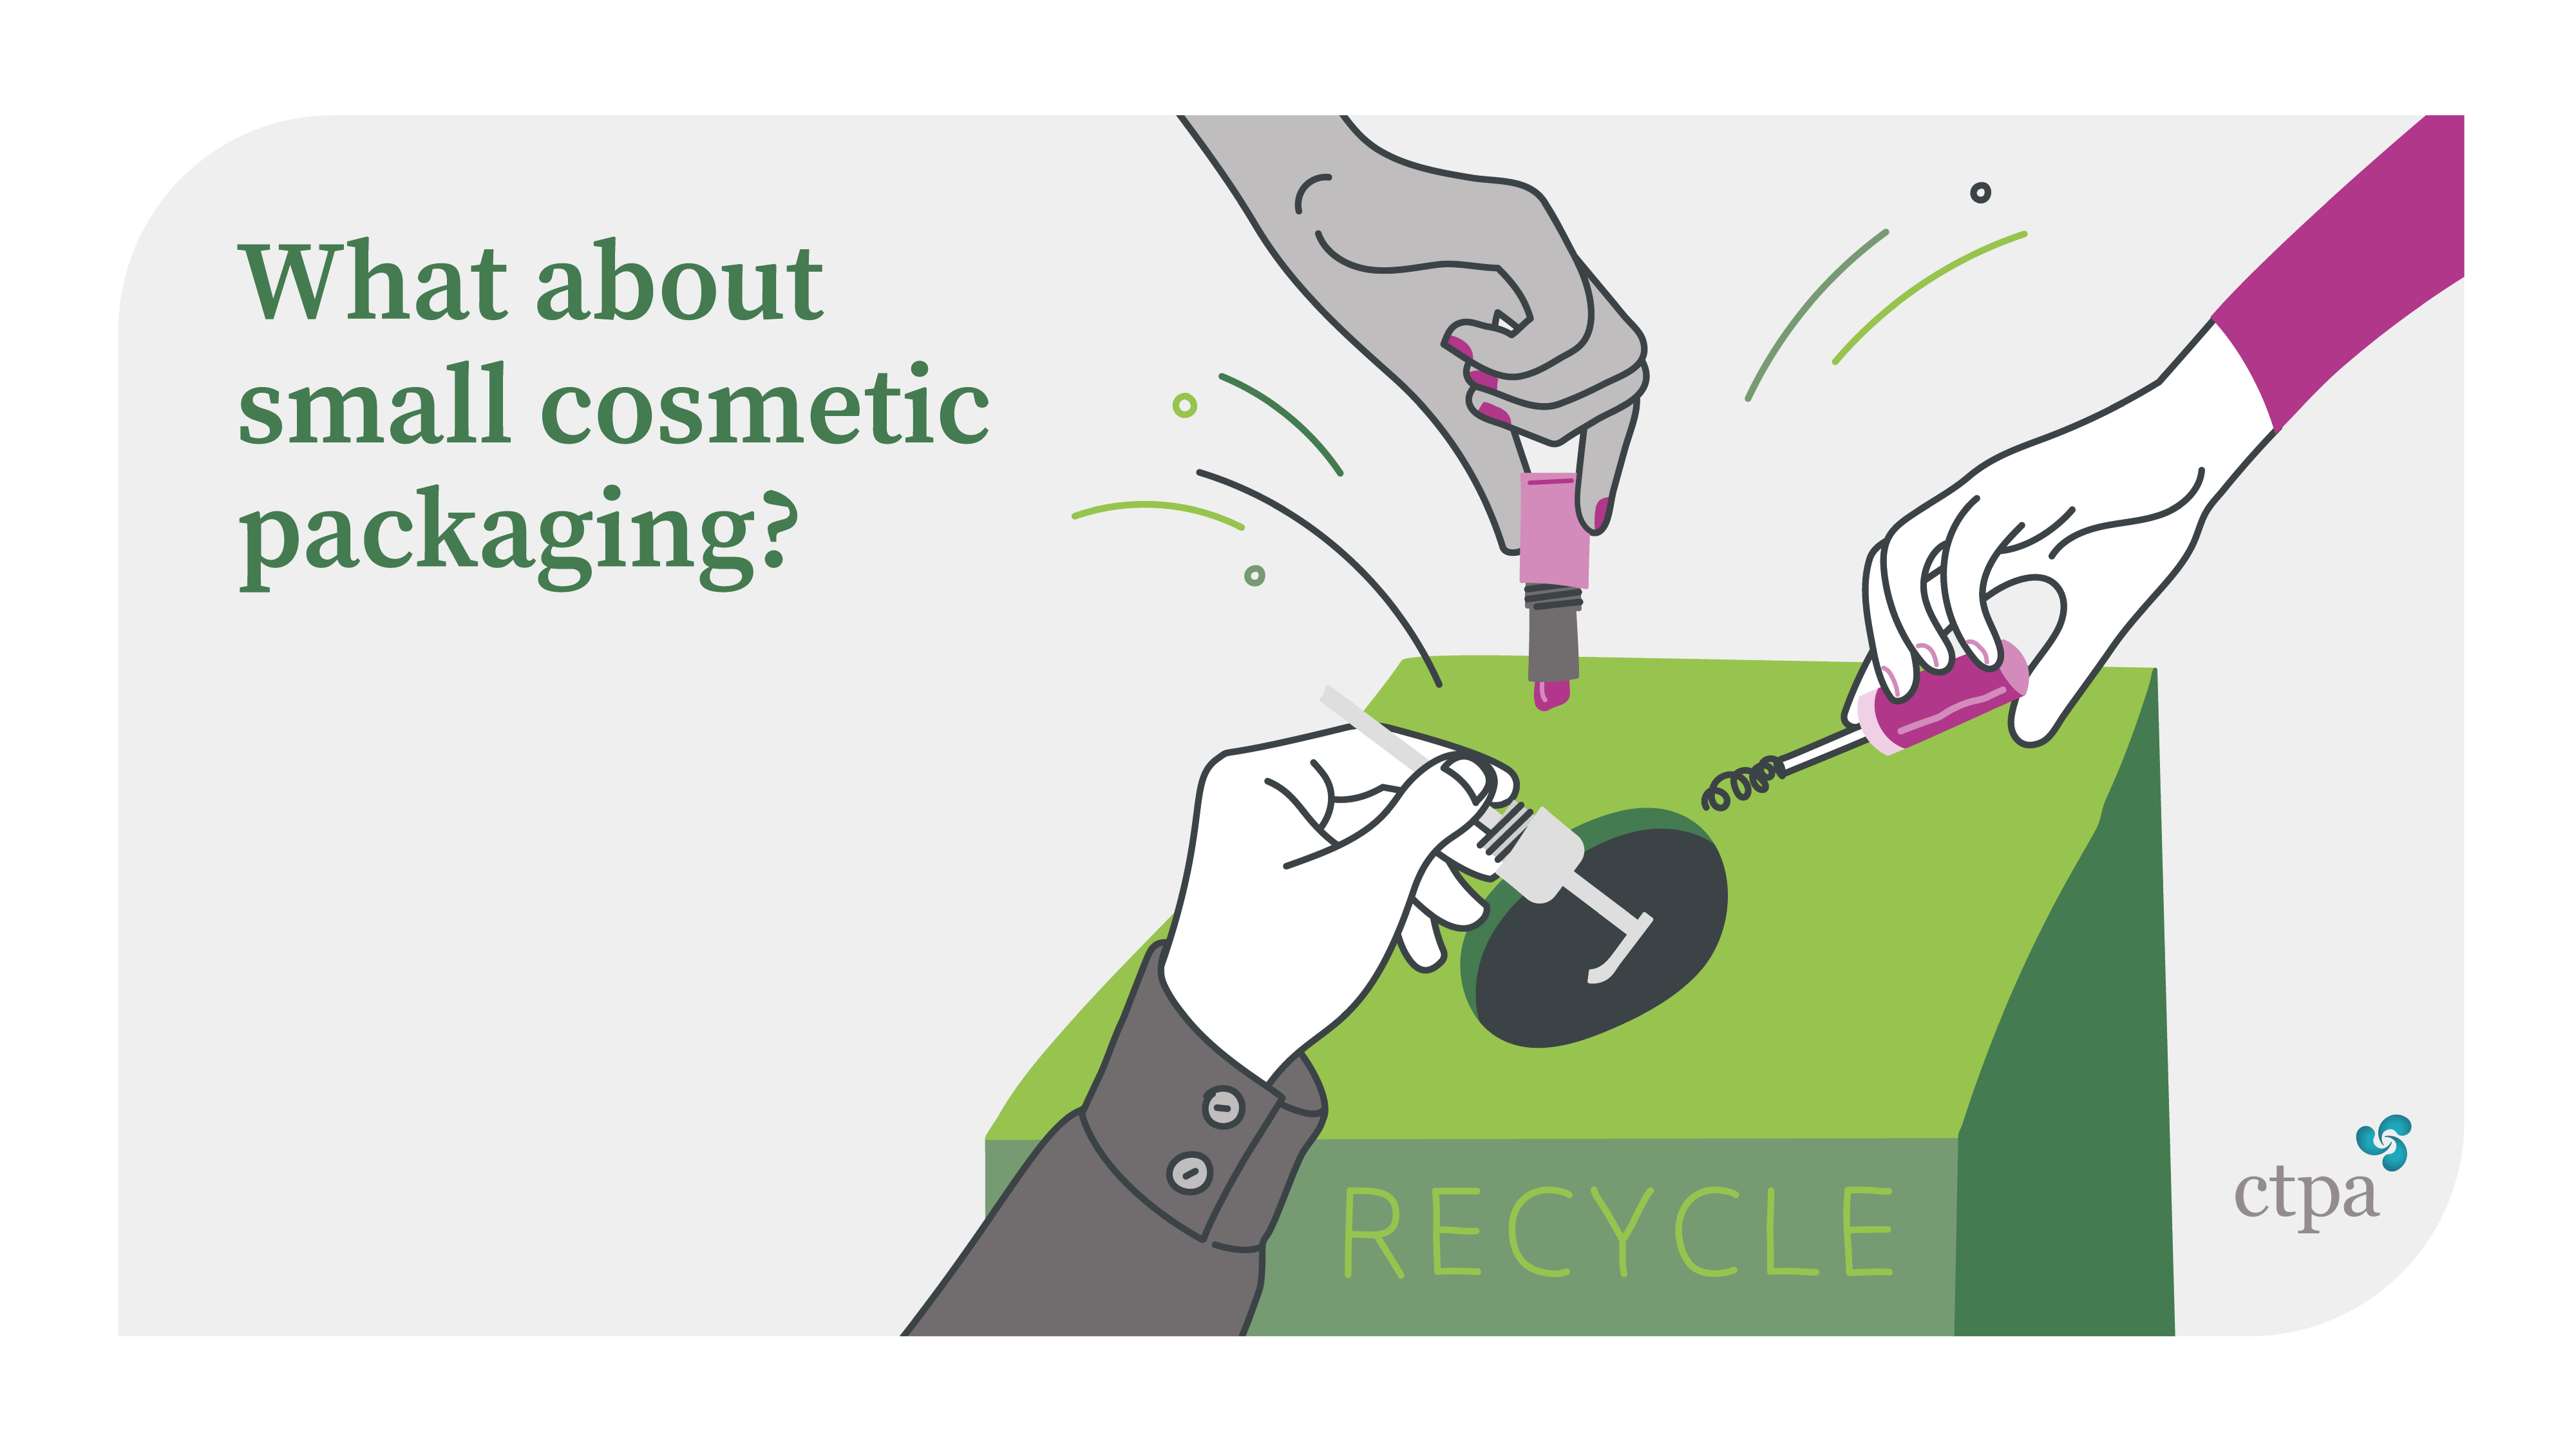 What small cosmetic packaging can you recycle?